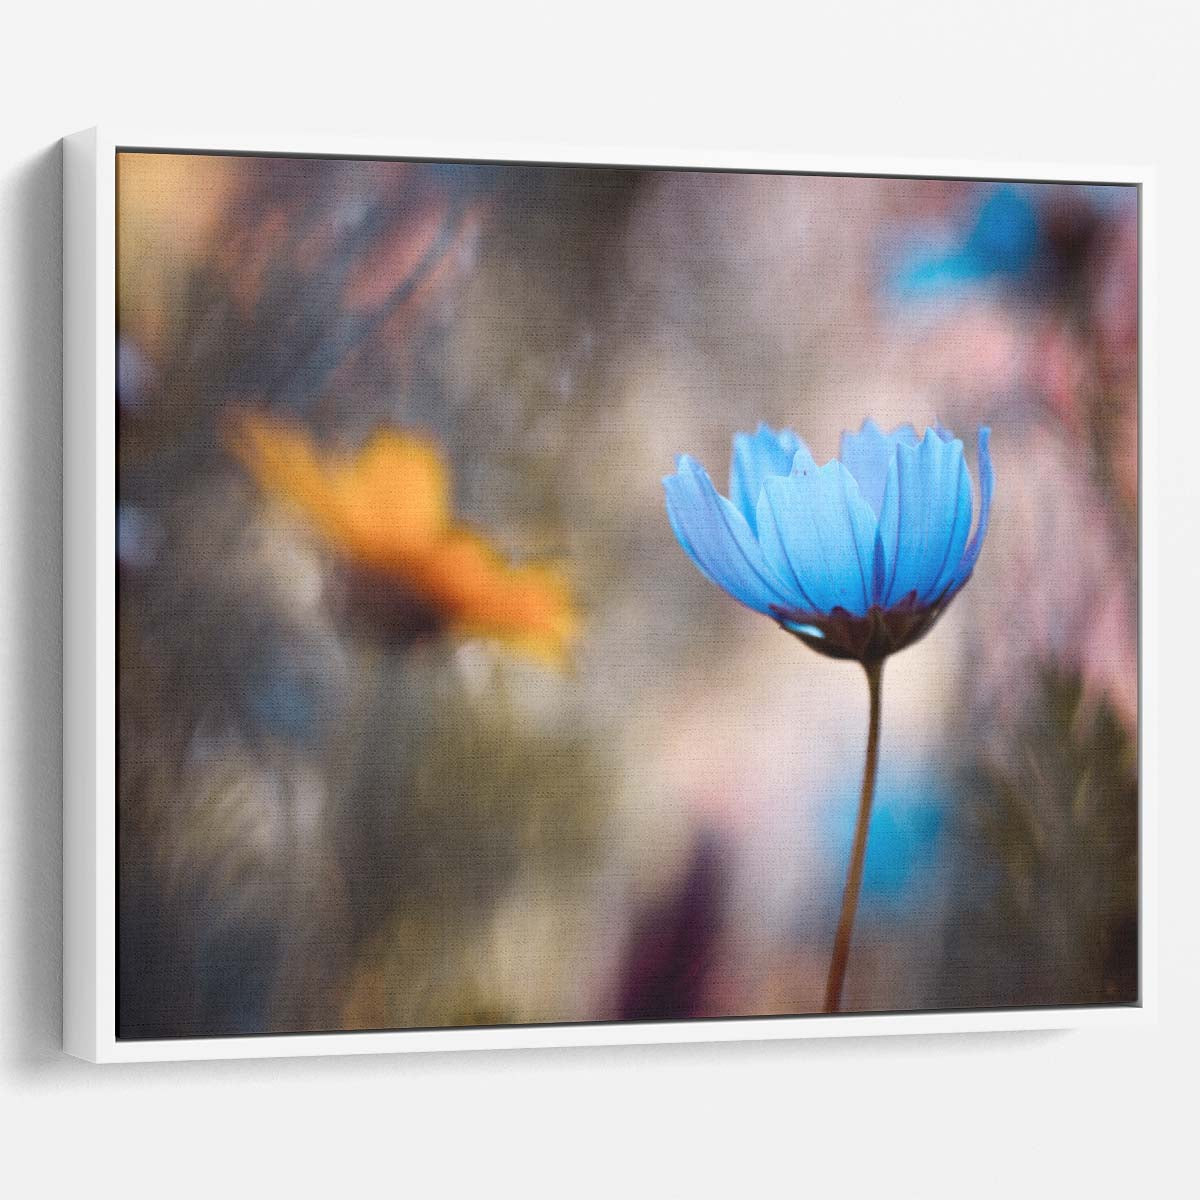 Blue Floral Duo Macro Garden Bokeh Wall Art by Luxuriance Designs. Made in USA.